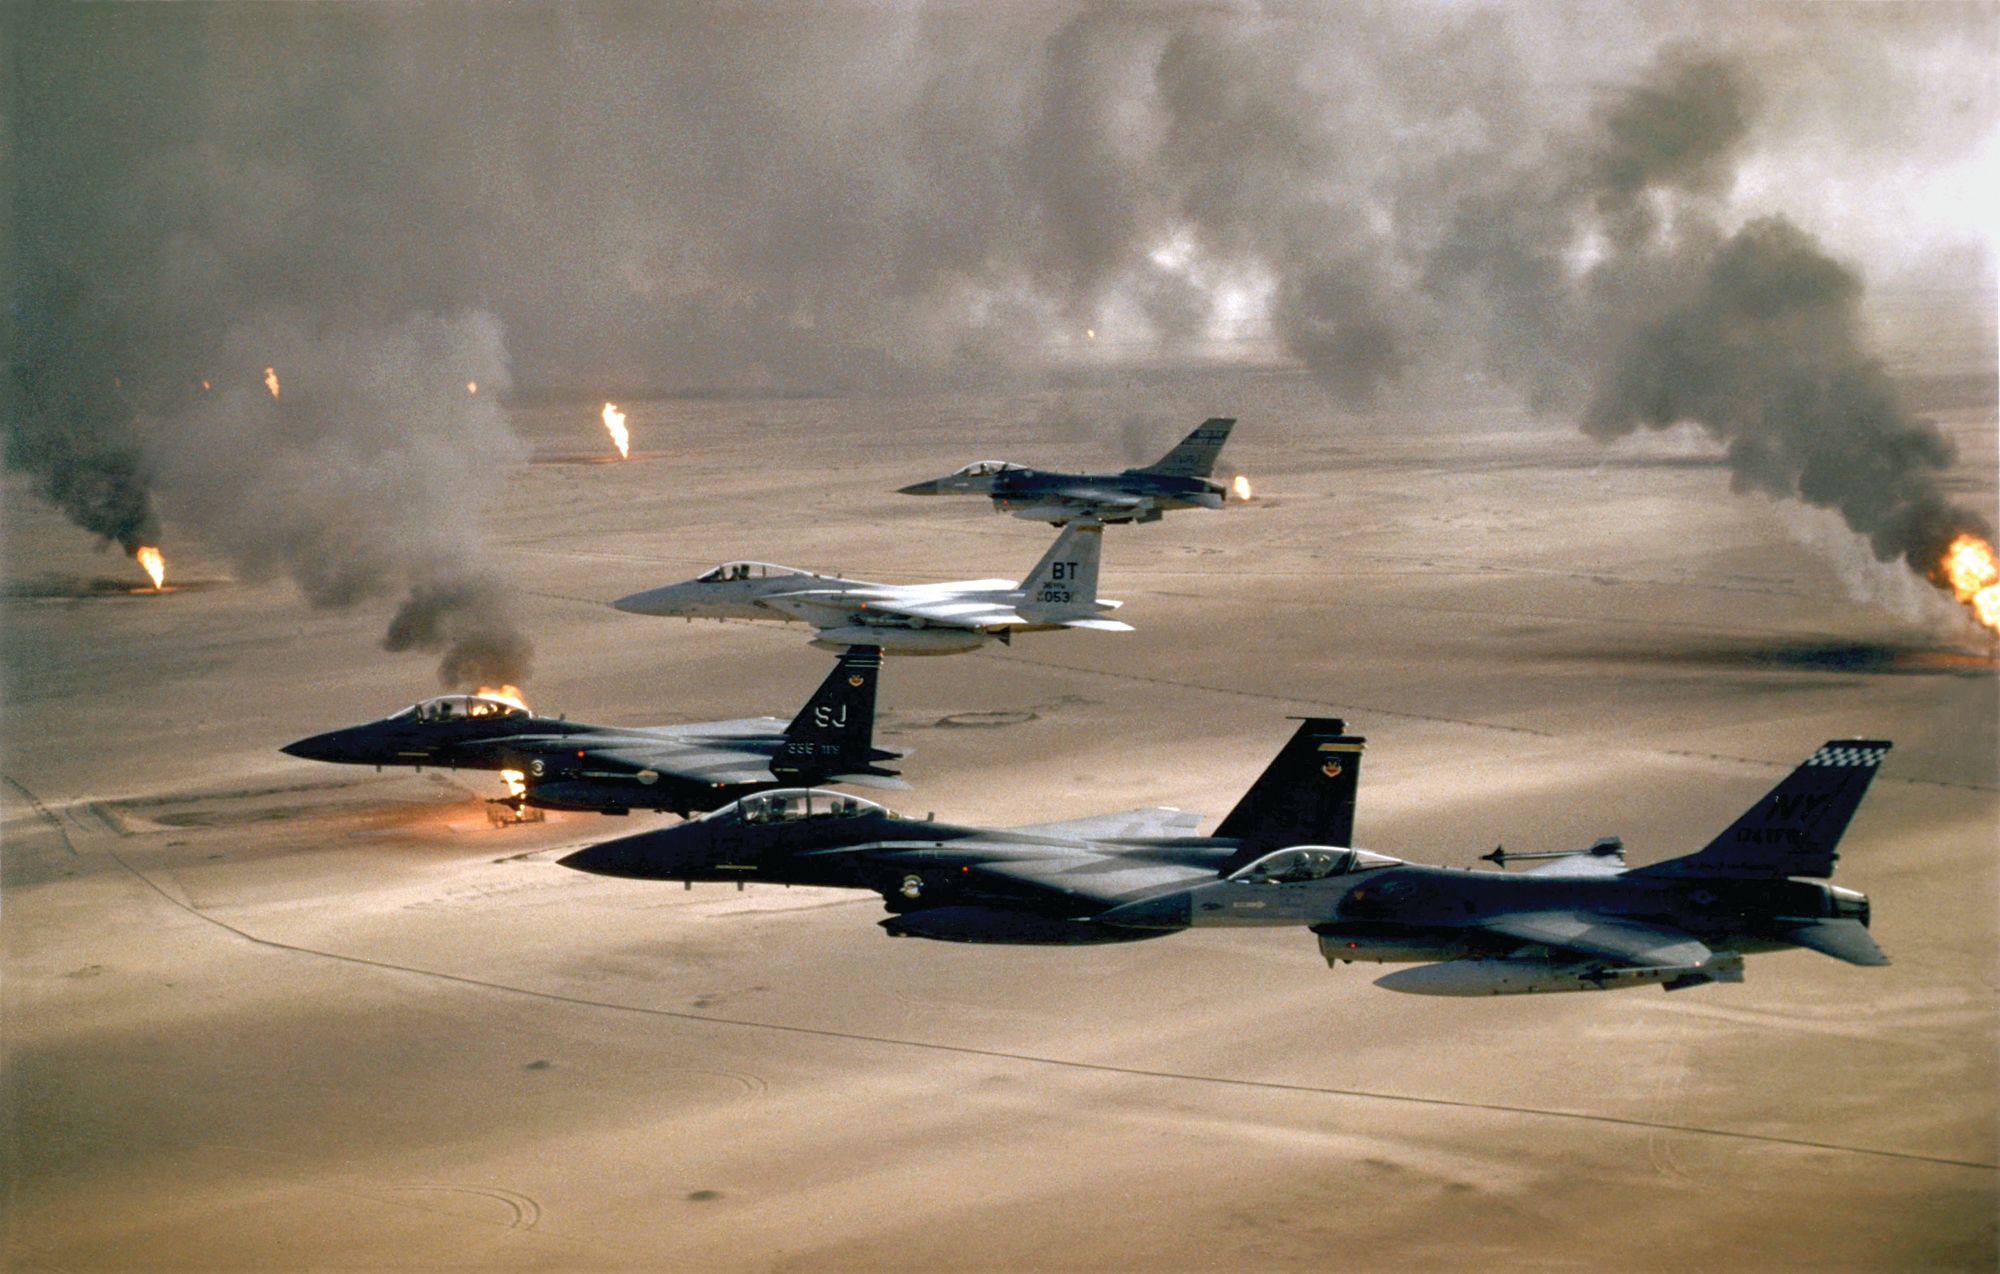 U.S. Air Force fighter aircraft fly through a thick screen of smoke caused by burning oil wells that coincided with the Coalition's air strikes. Several F-15 pilots shot down Iraqi aircraft on the first night of the war, while F-16 pilots participated in deep-penetration strikes against command-and-control bunkers, SCUD targets, and airfields.